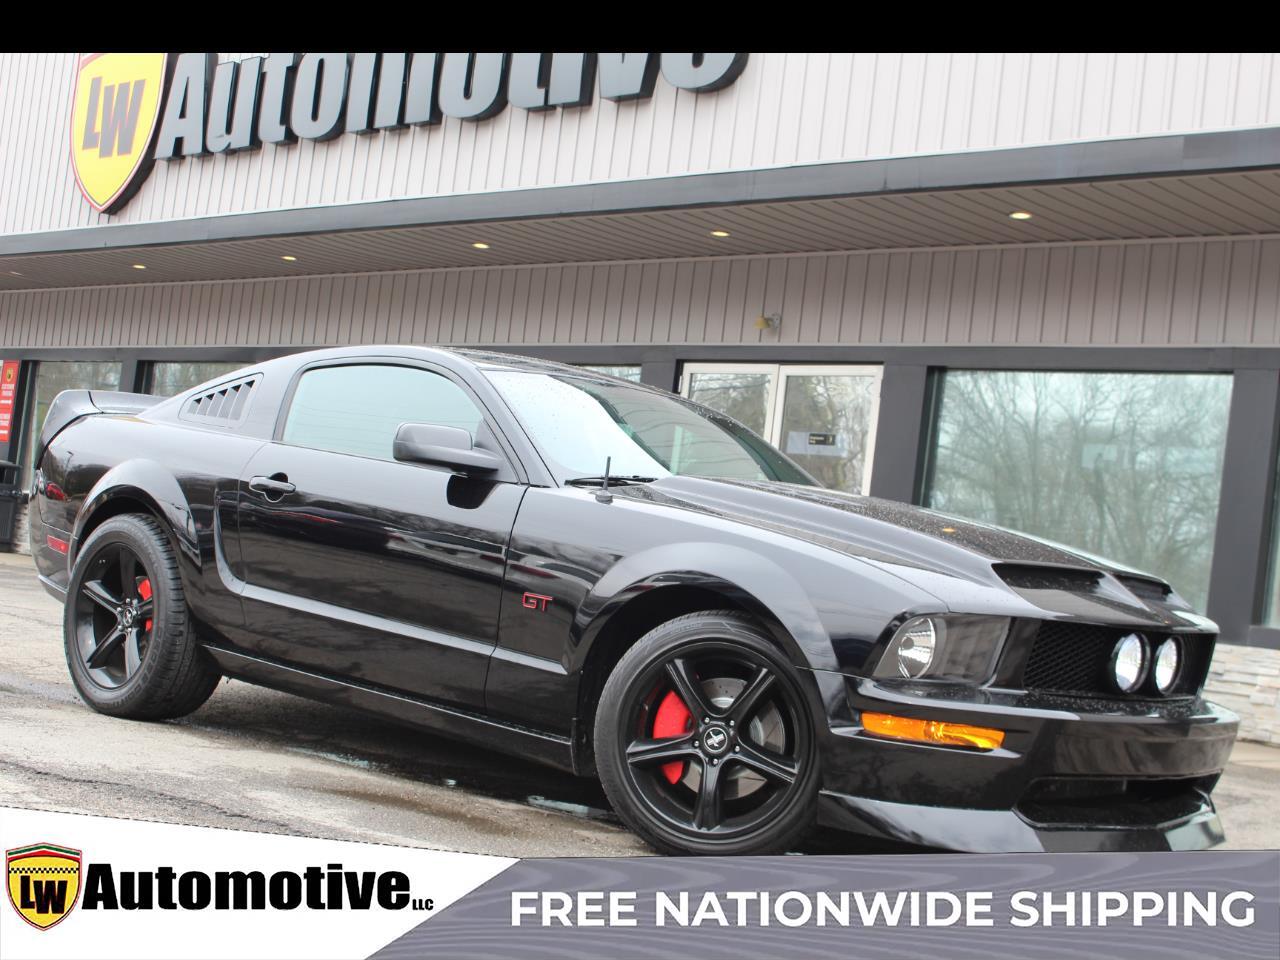 2006 Ford Mustang 2dr Cpe GT Deluxe